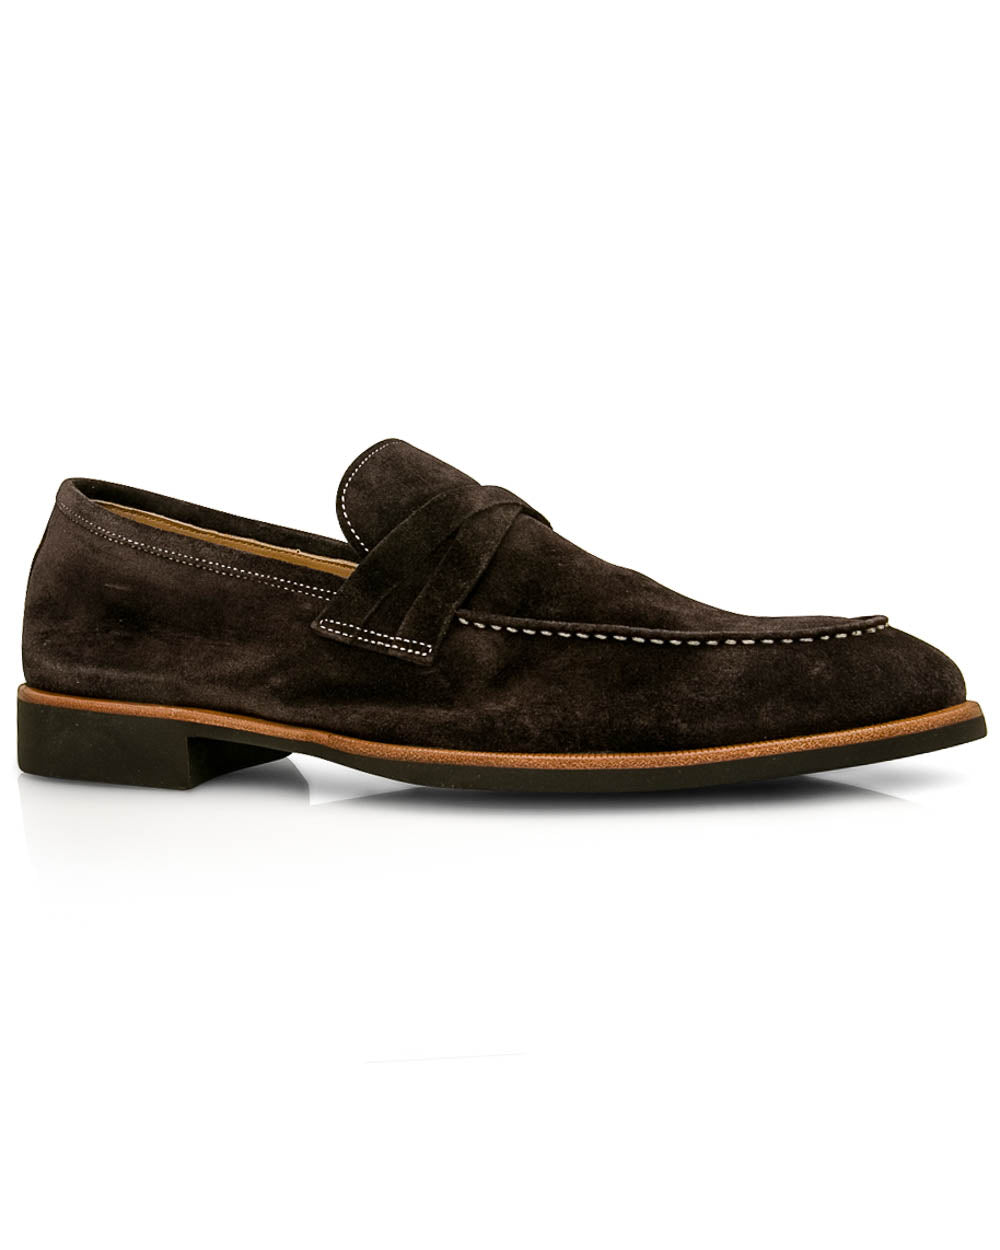 Lavagna Suede Crisscross Penny Loafer